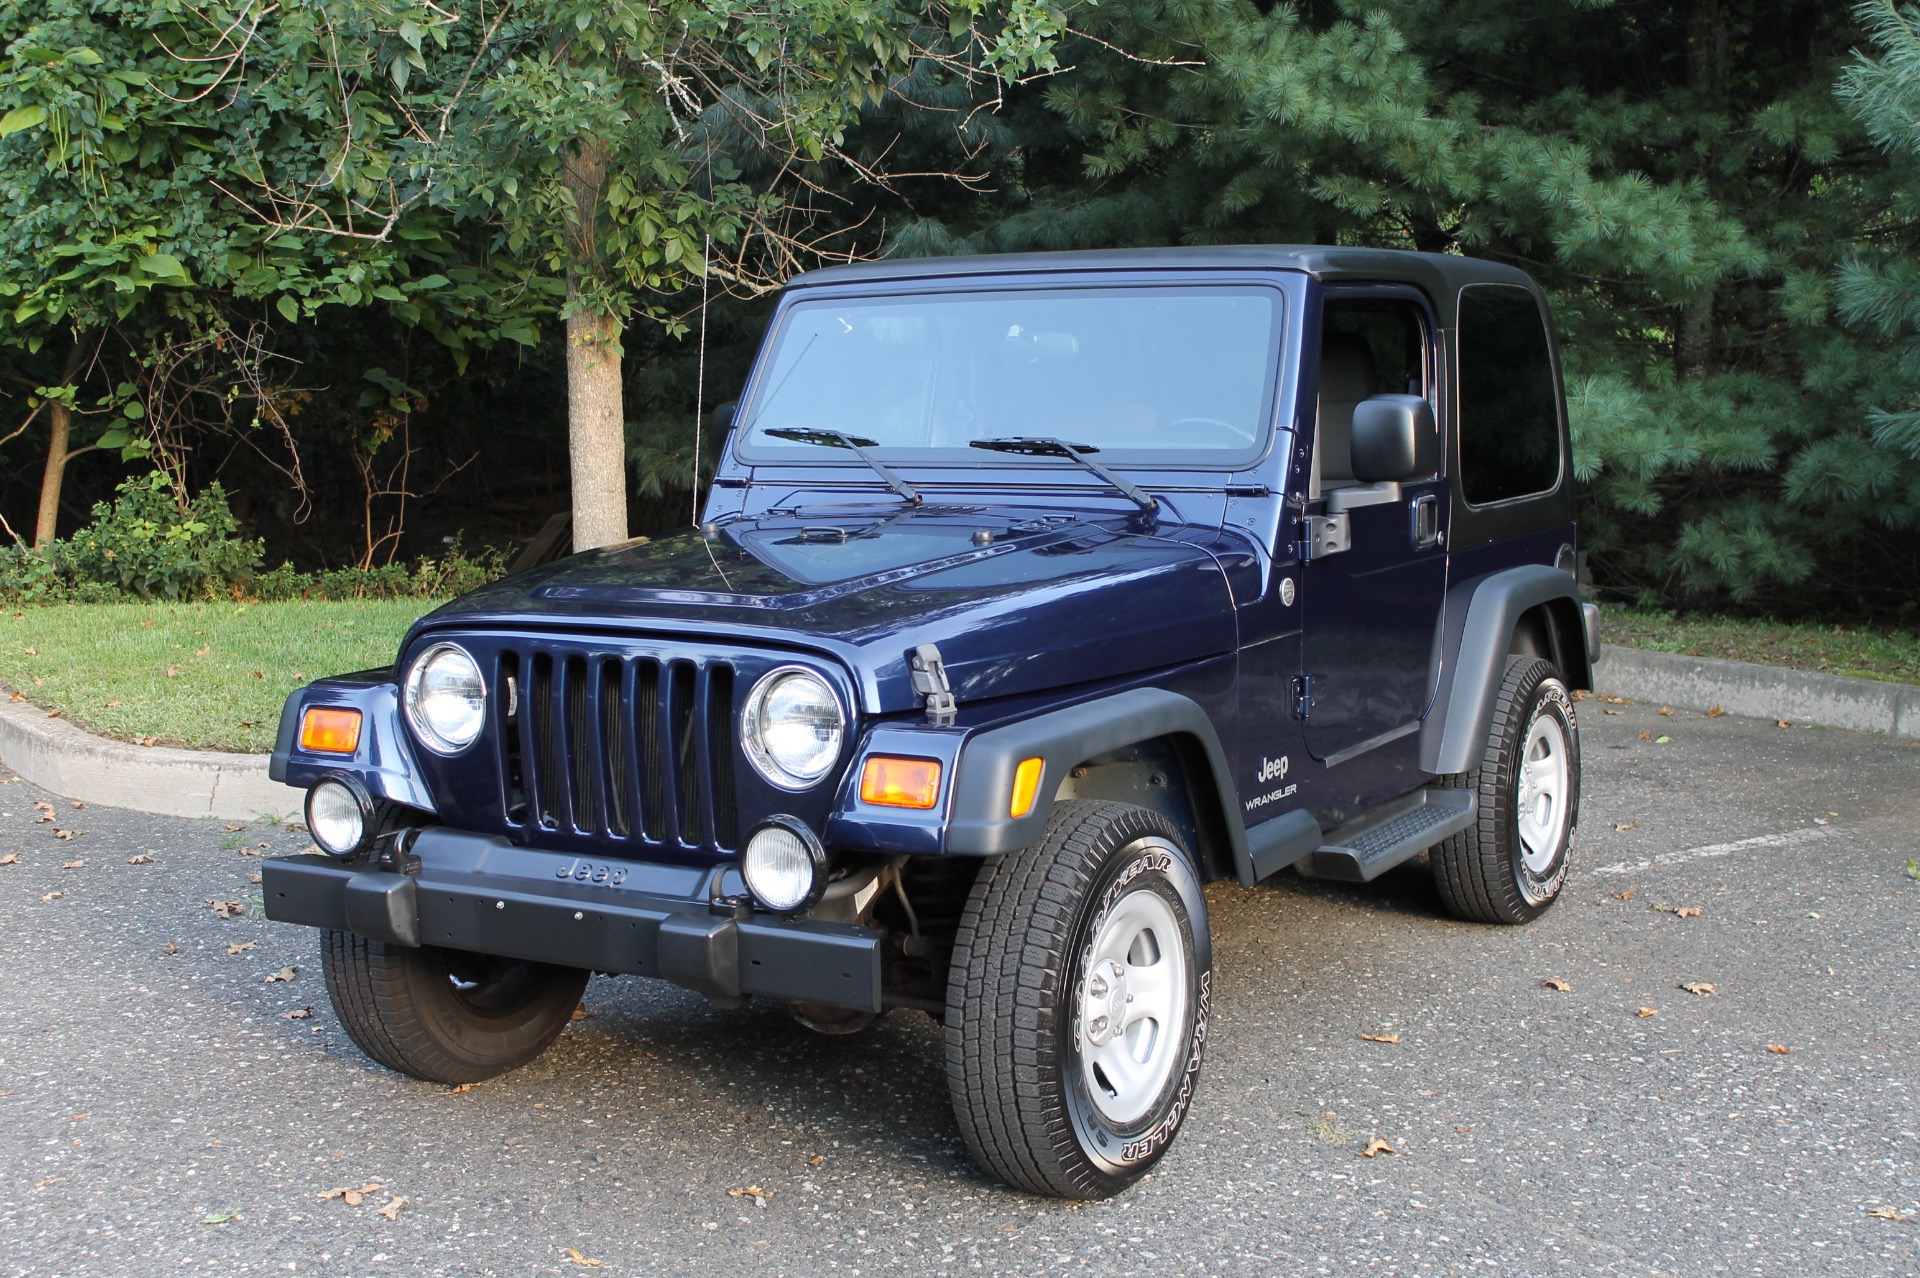 Used 2006 Jeep Wrangler SE Automatic SE For Sale ($17,900) | Legend Leasing  Stock #4941